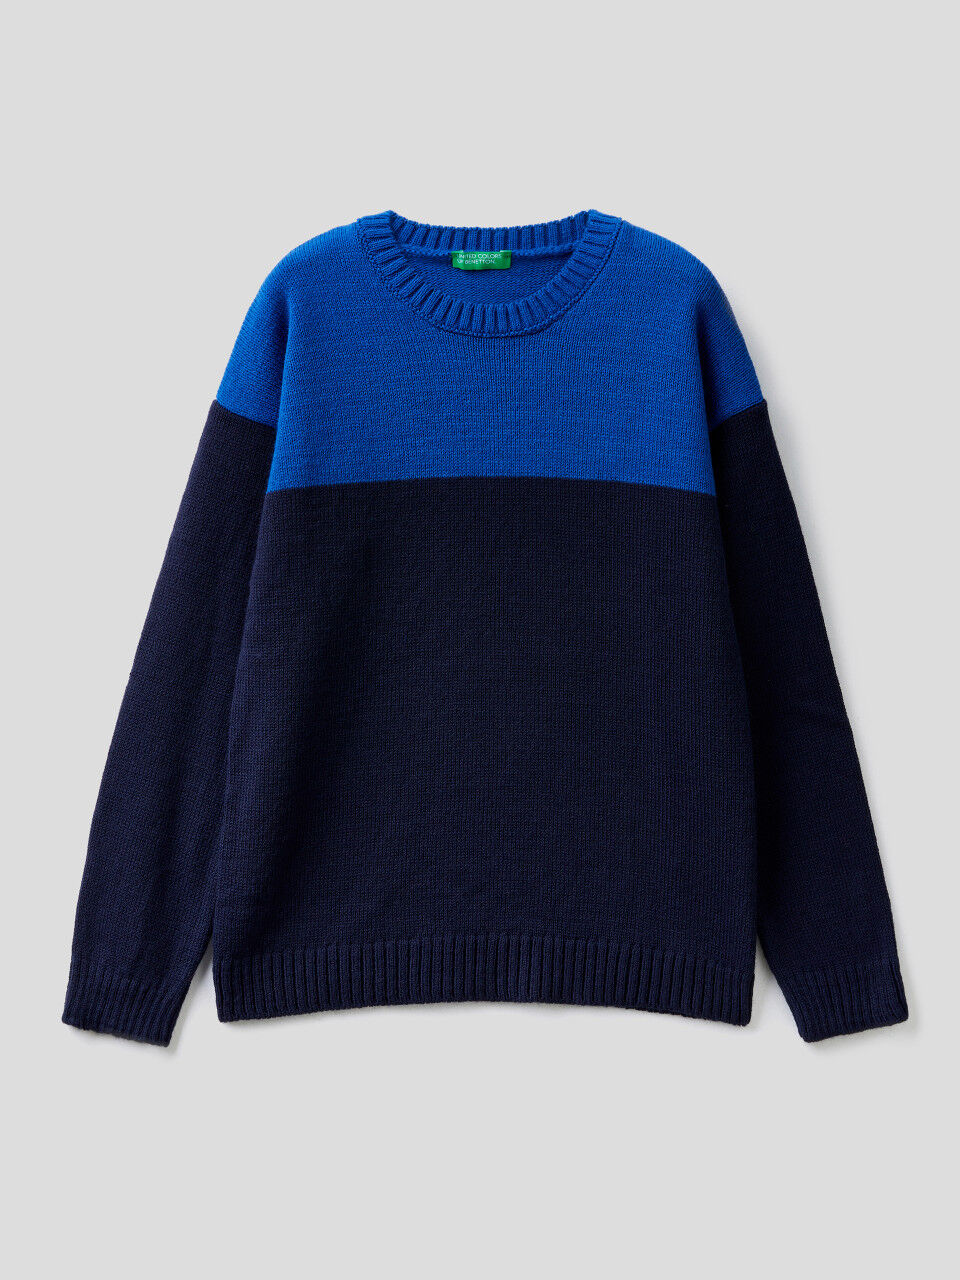 Benetton United Colors of Benetton Boys Blue Geometric Knit Pullover Jumper Size 6-7 Year 